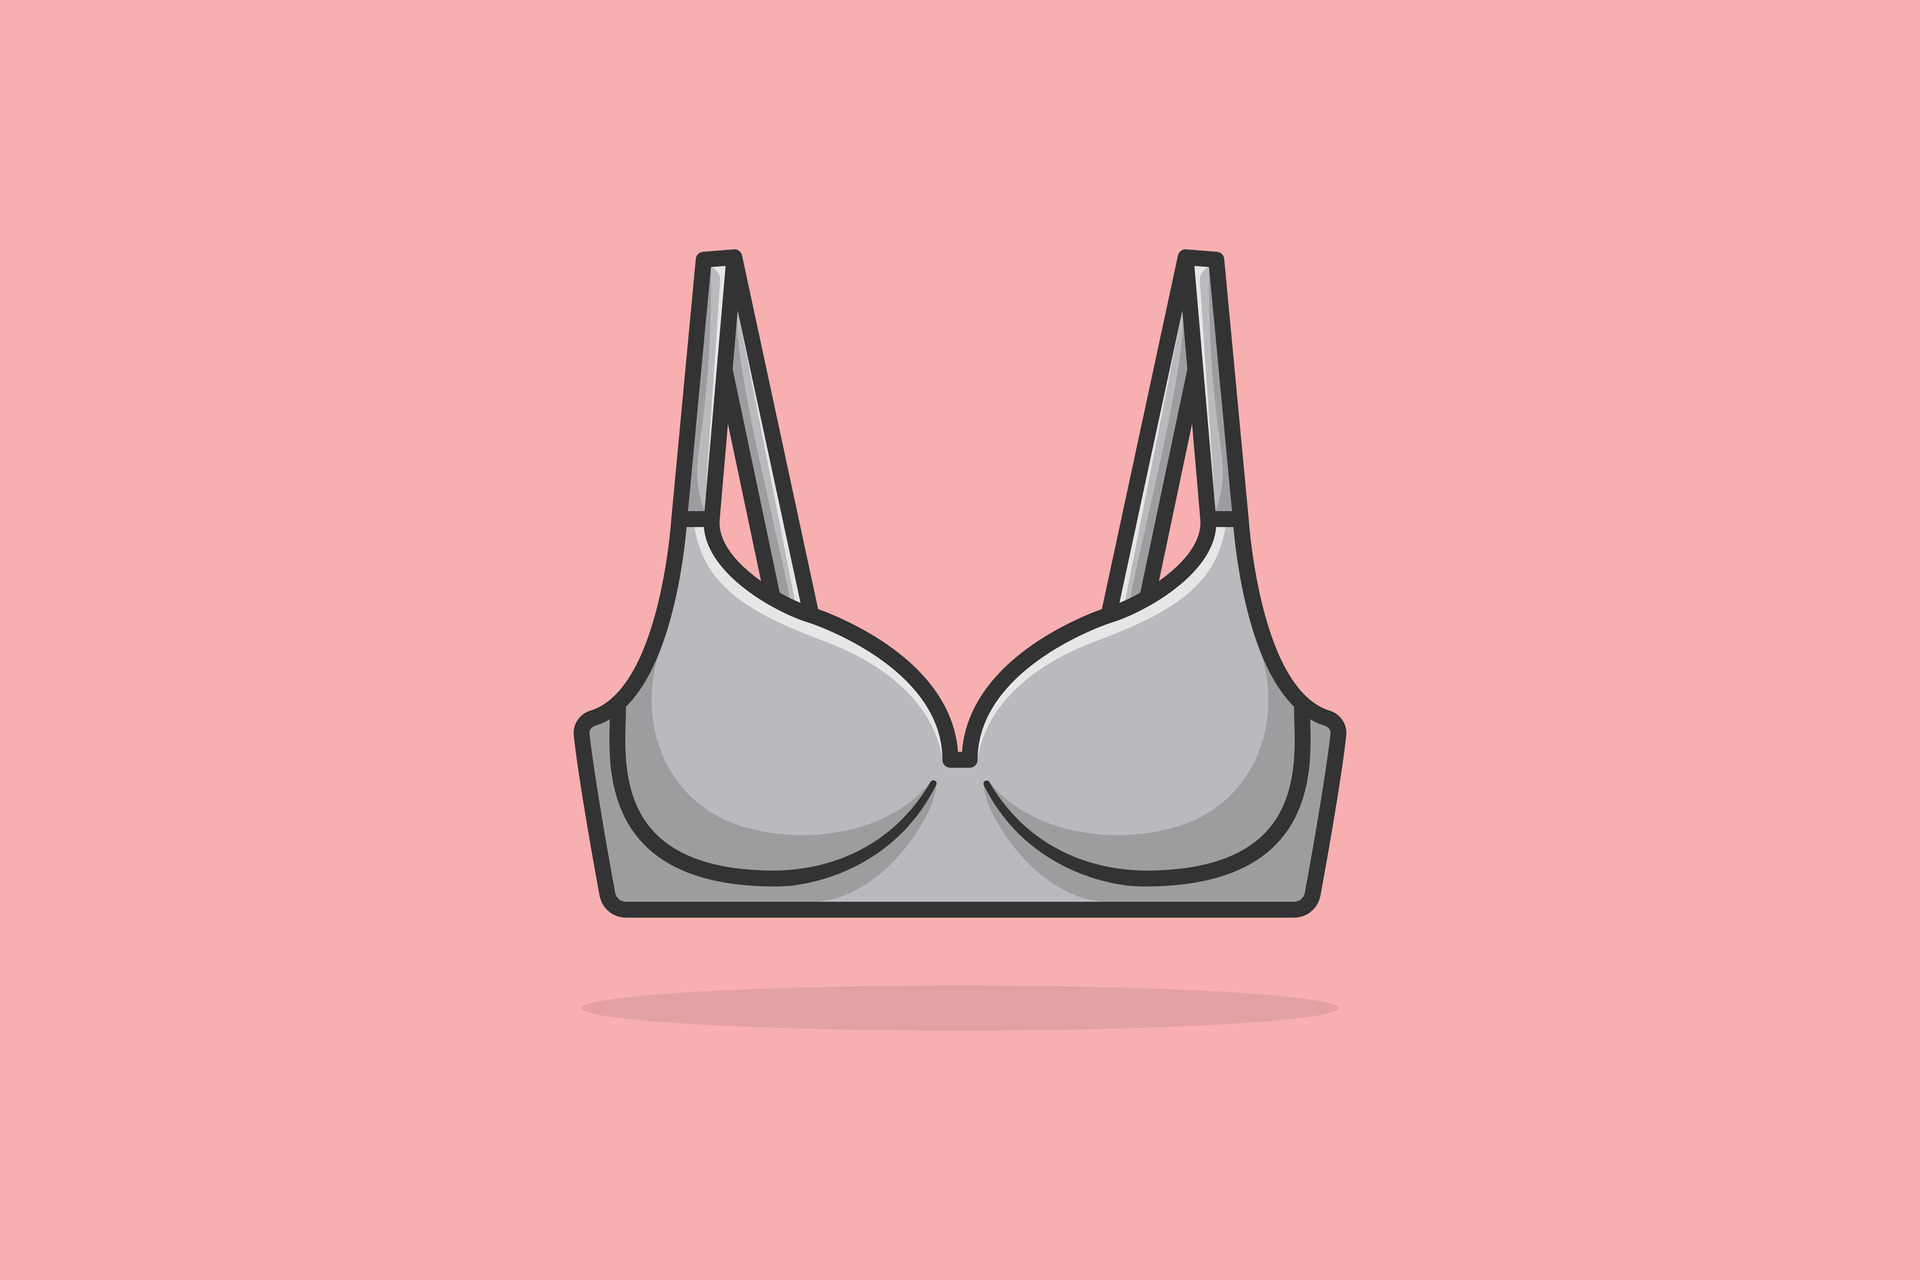 Vibrant Asymmetric Gym Bra For Women And Girls Wear vector illustration.  Sports and fashion objects icon concept. Girls underwear bra vector design  with shadow. 33357012 Vector Art at Vecteezy